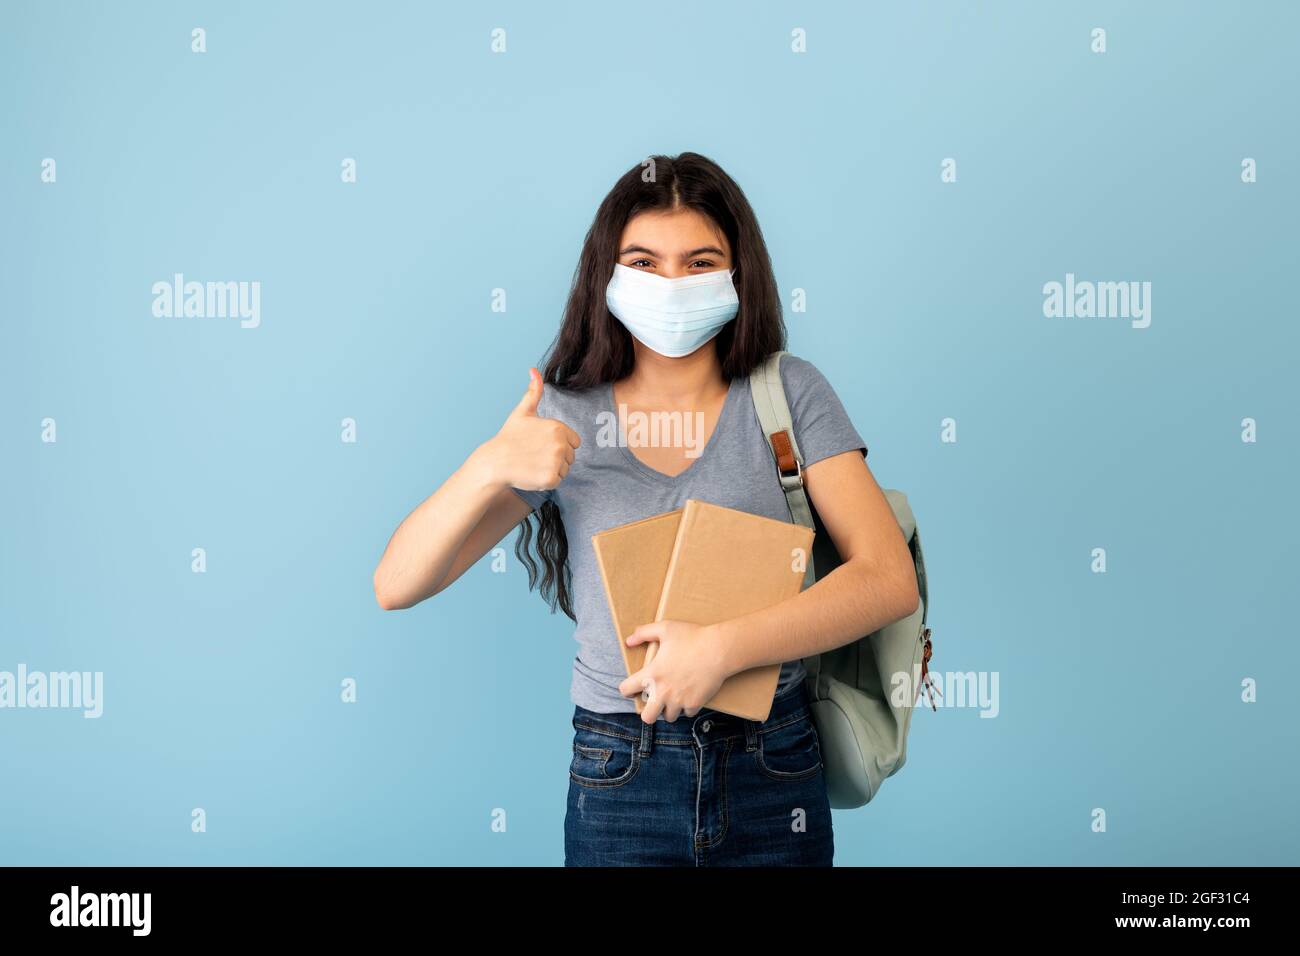 Funky Indian teen student in face mask with backpack holding books and showing thumb up gesture on blue background Stock Photo